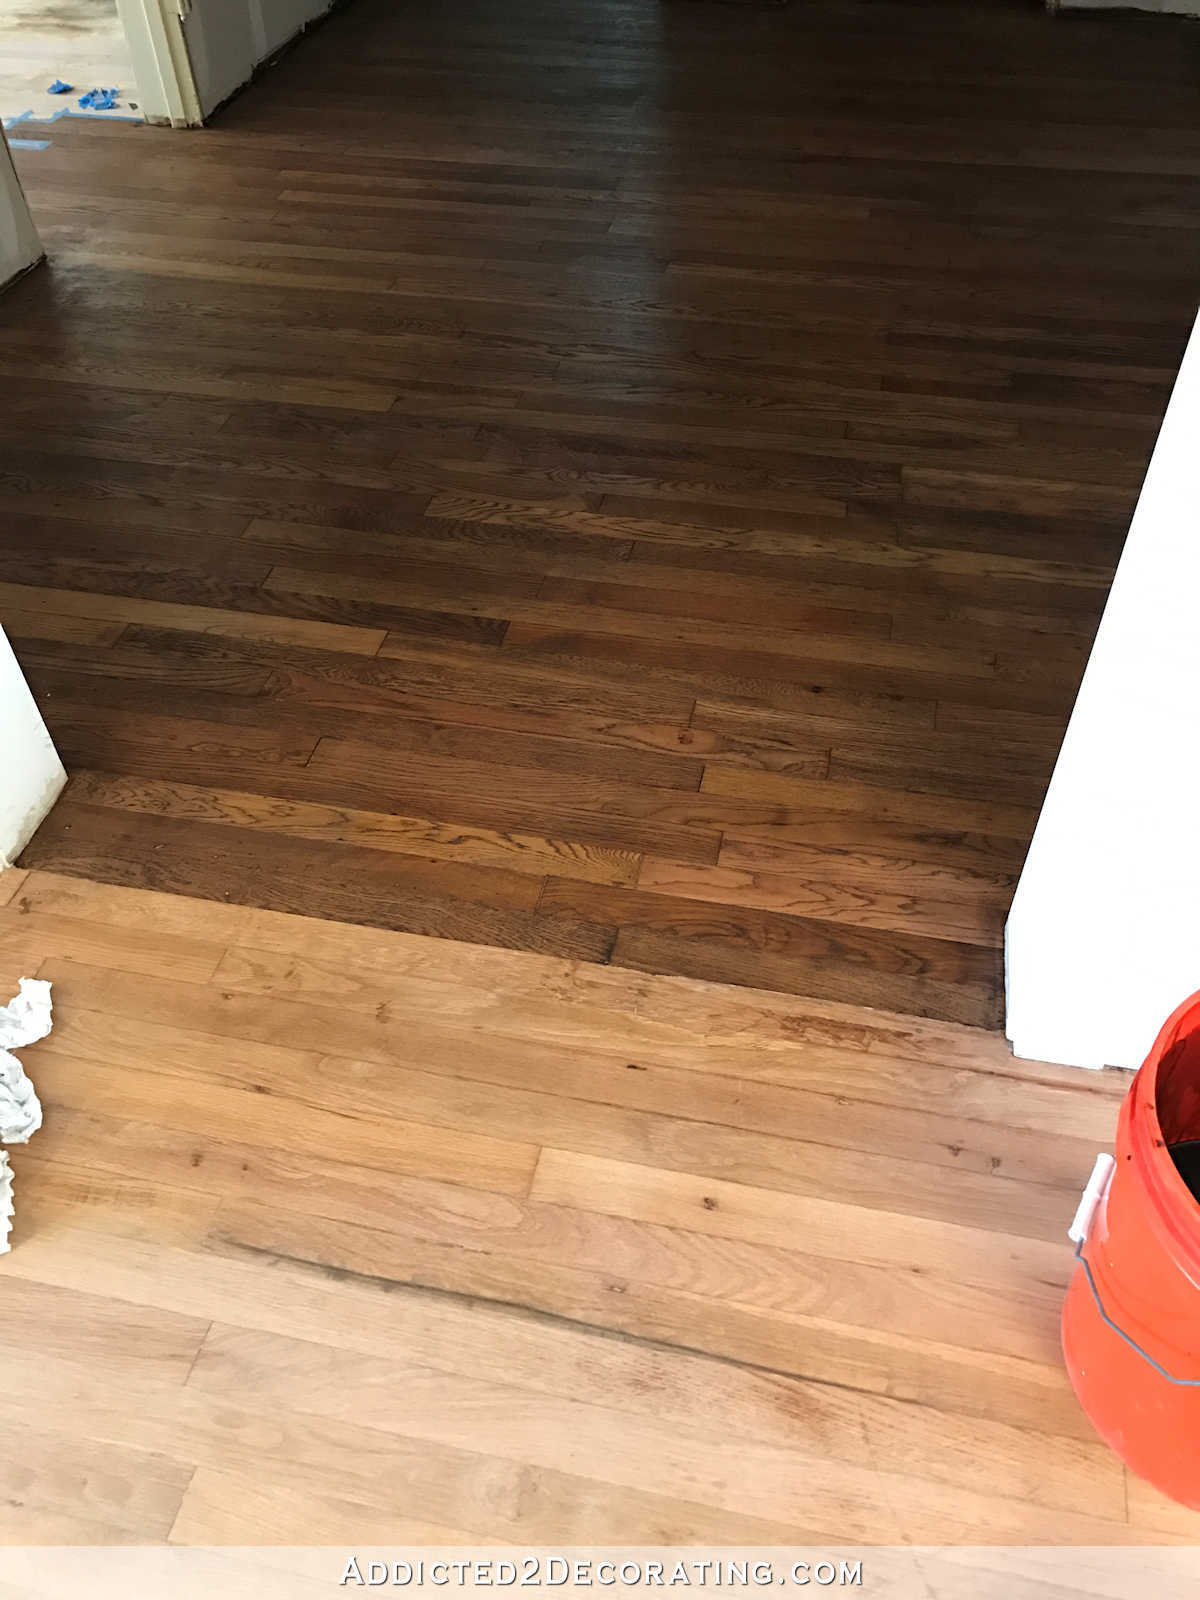 20 Popular How to Refurbish Hardwood Floors Yourself 2024 free download how to refurbish hardwood floors yourself of adventures in staining my red oak hardwood floors products process in staining red oak hardwood floors 2 tape off one section at a time for